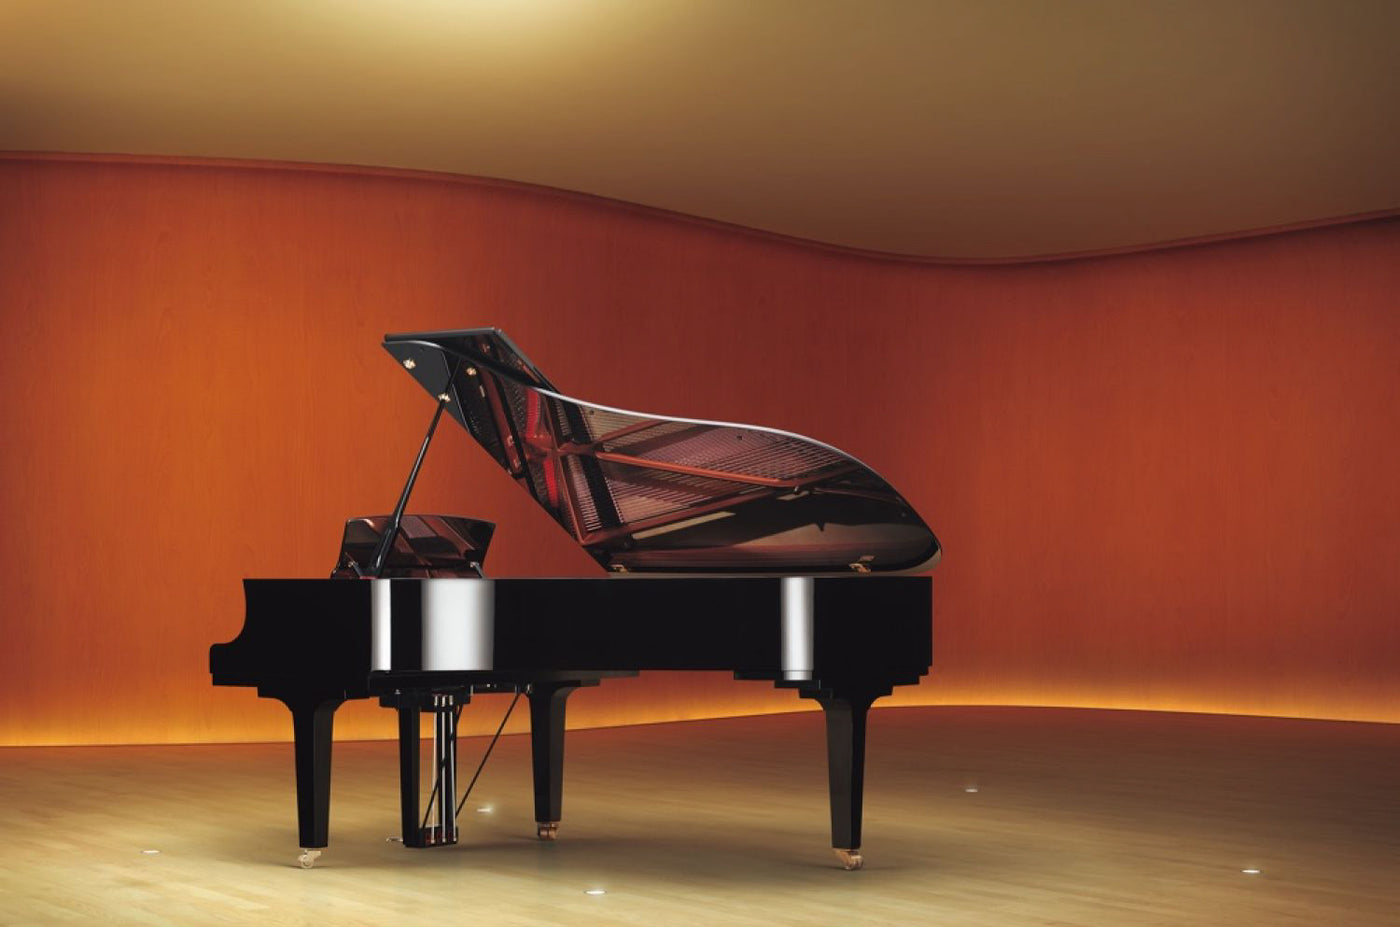 A grand piano with an open lid prominently displayed in a room with warm lighting and a curved wooden wall, exemplifying elegant design and craftsmanship in piano manufacturing.